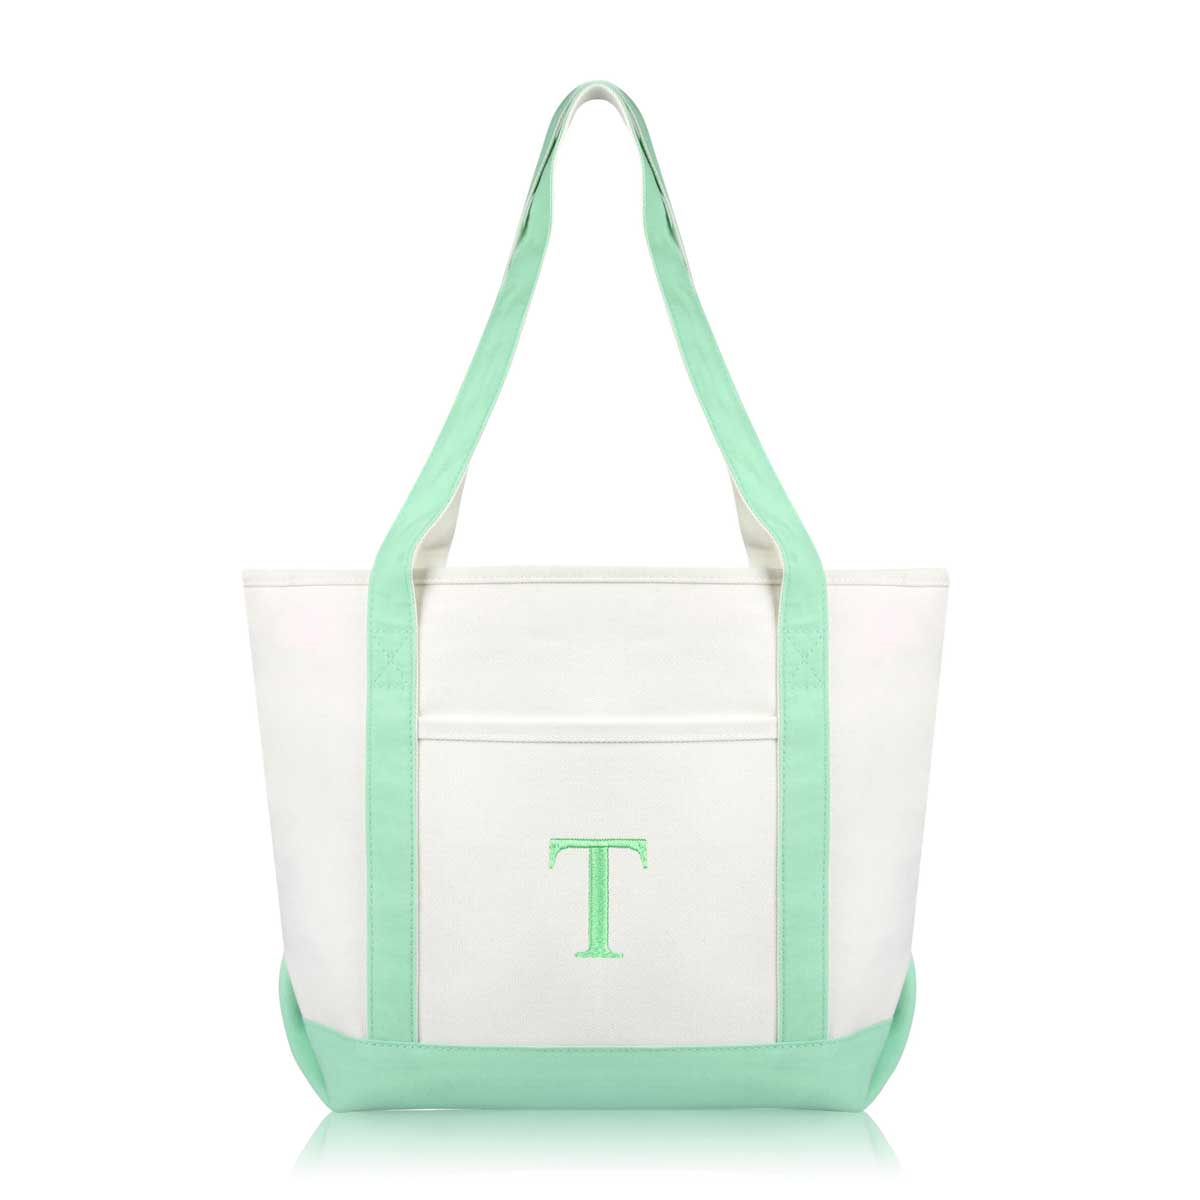 Dalix Medium Personalized Tote Bag Monogrammed Initial Letter - T